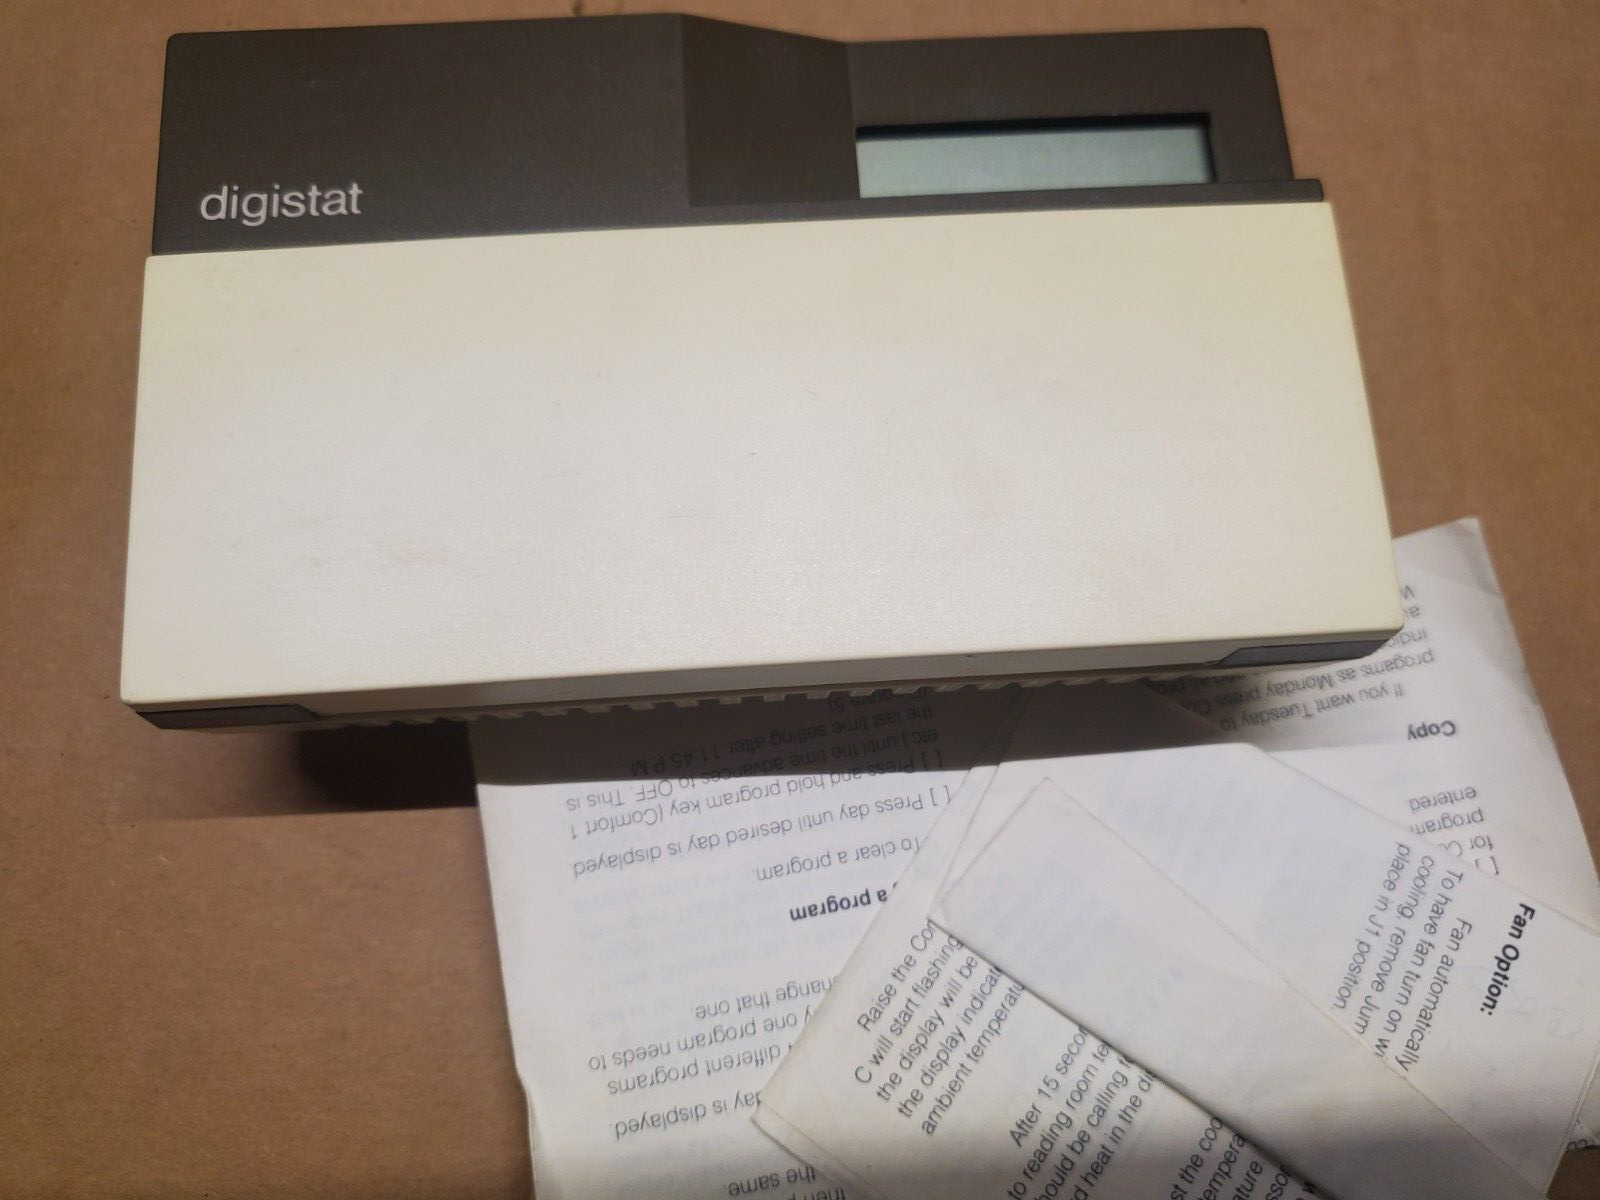 Vintage DIGISTAT SIMPLESTAT 95-002-33 REPLACES HONEYWELL T8200